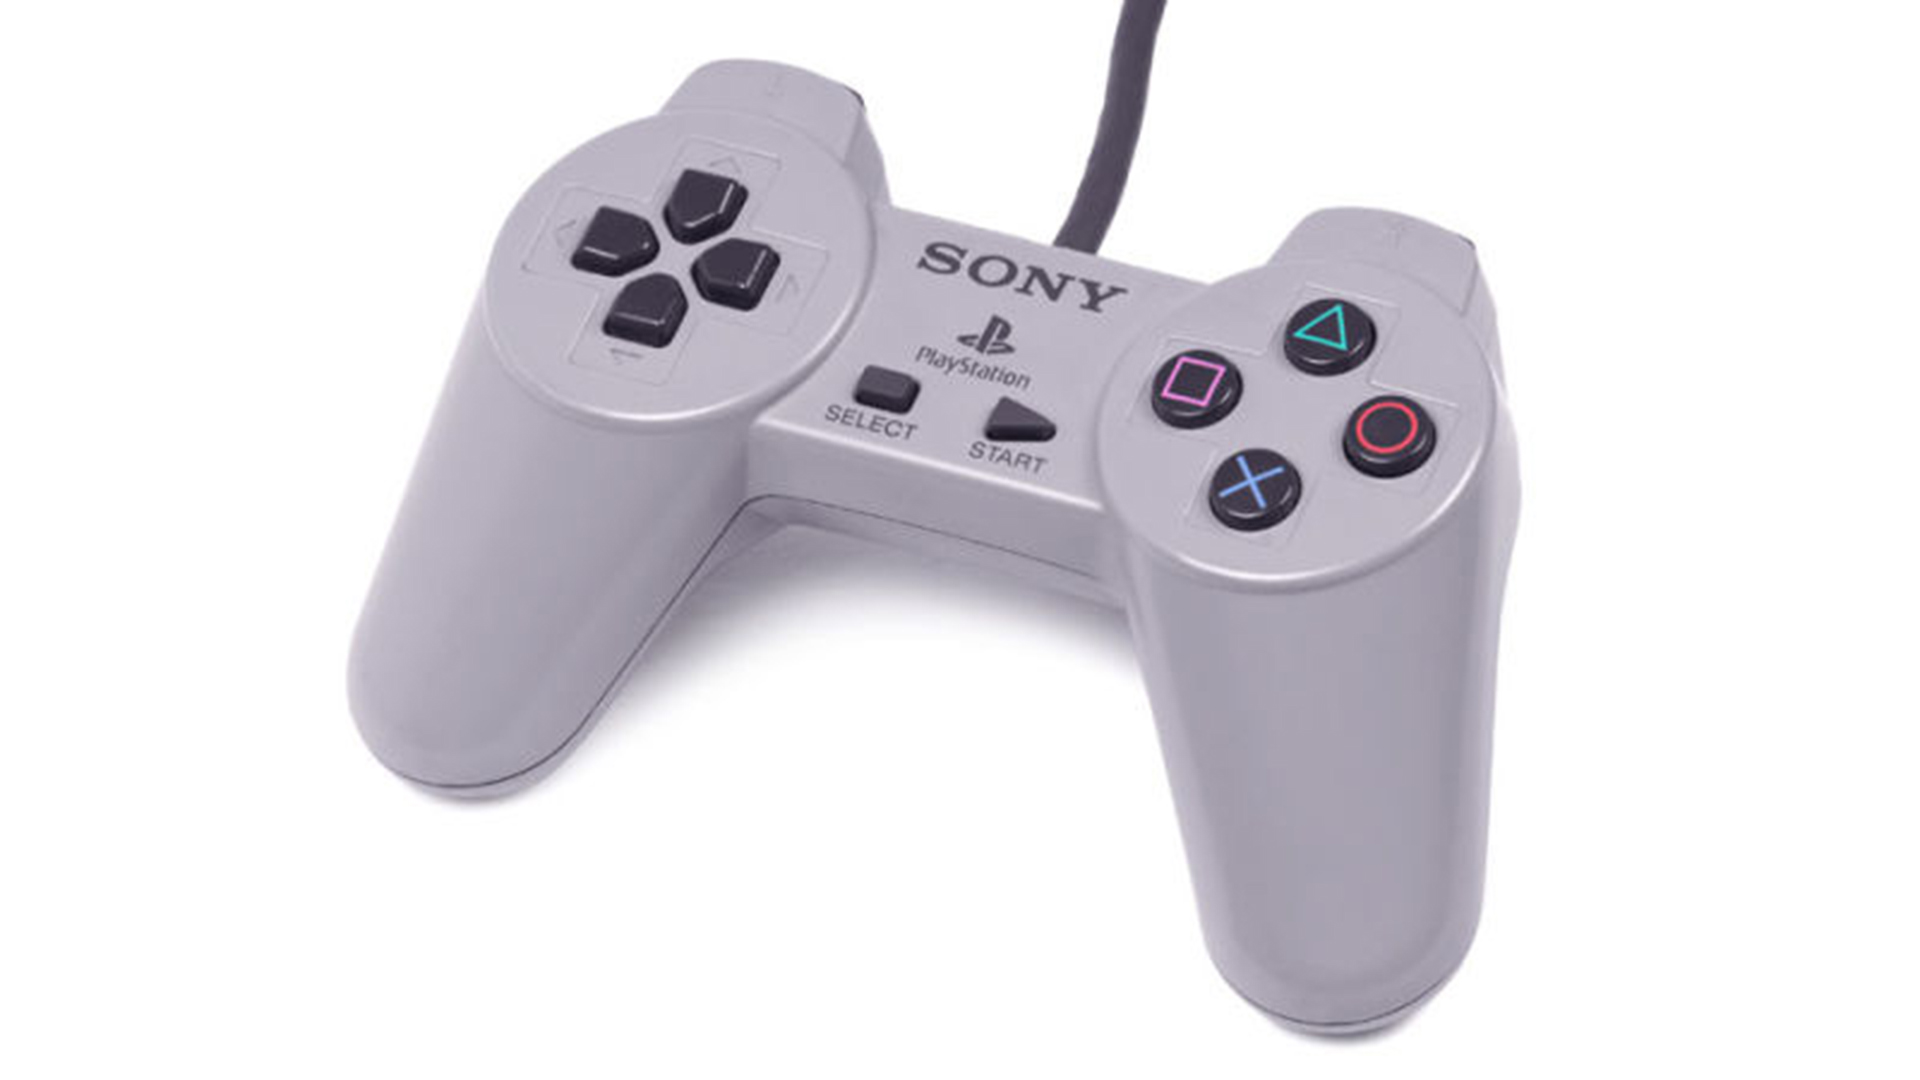 Game stick геймпады. Dualshock ps1. PLAYSTATION 1 Gamepad. Джойстик сони 1. Ps1 Controller.